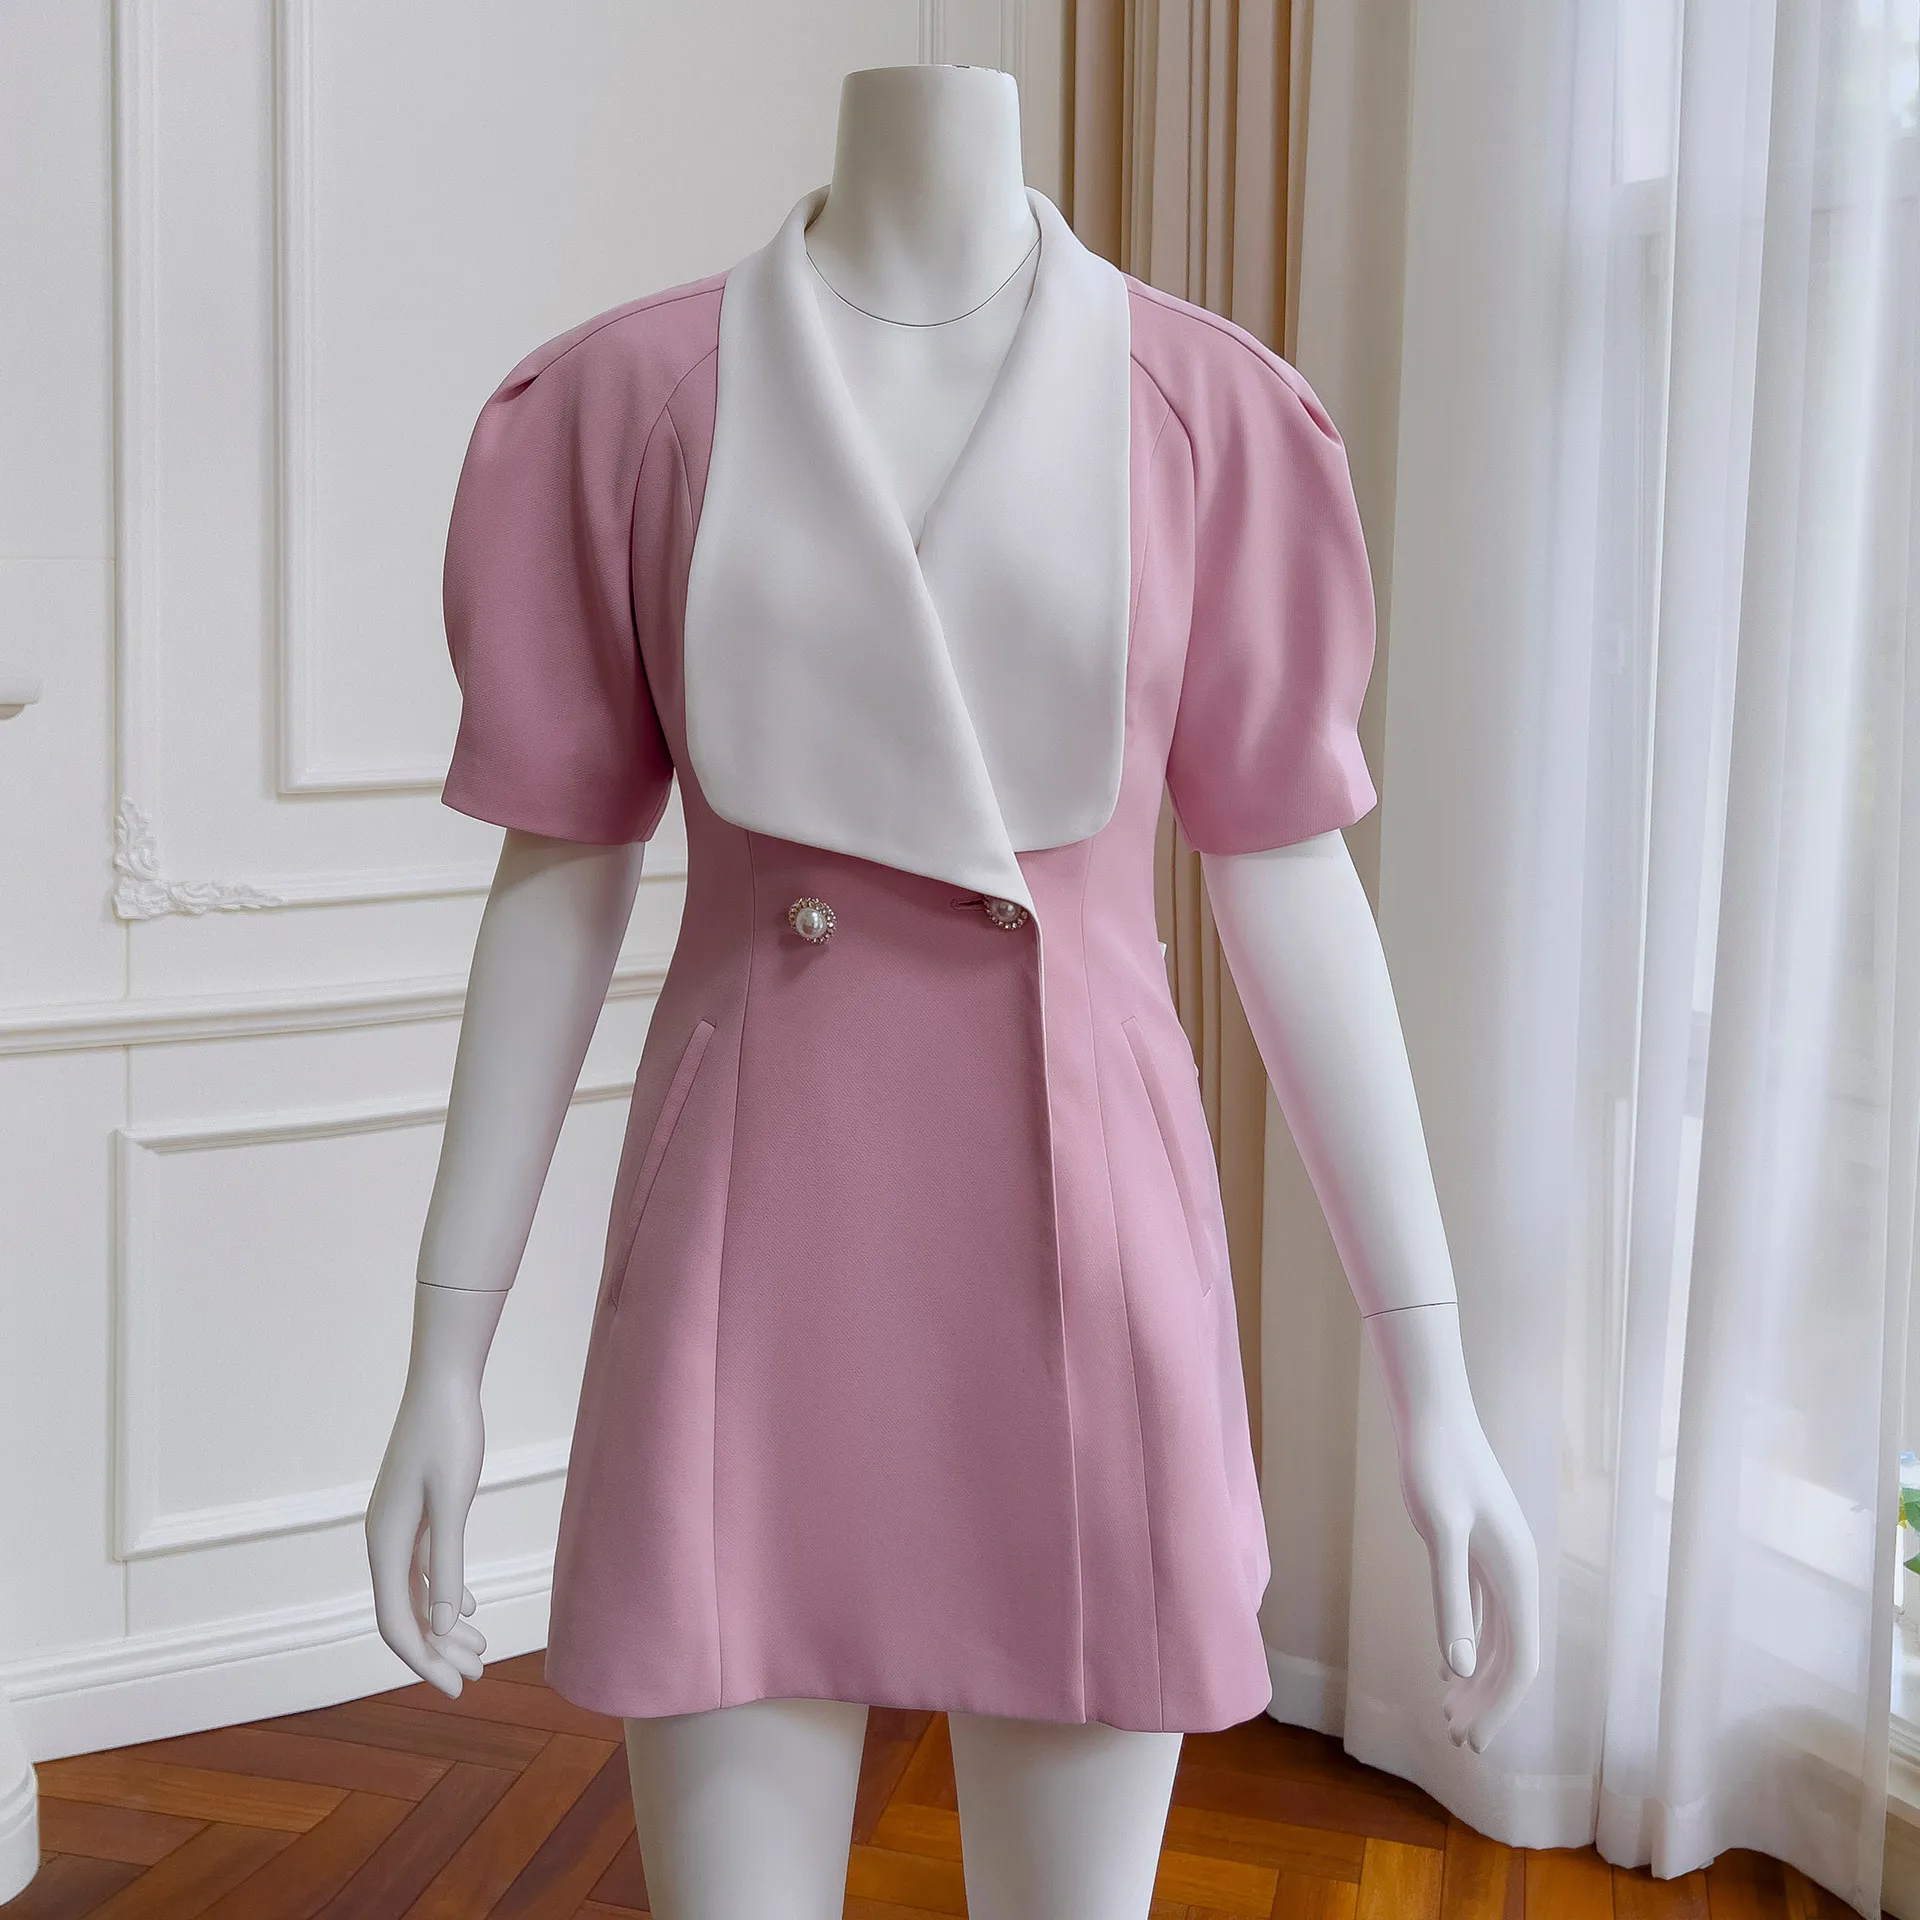 Summer new professional style suit dress, small stature, pink, age reducing short skirt, backless 68145